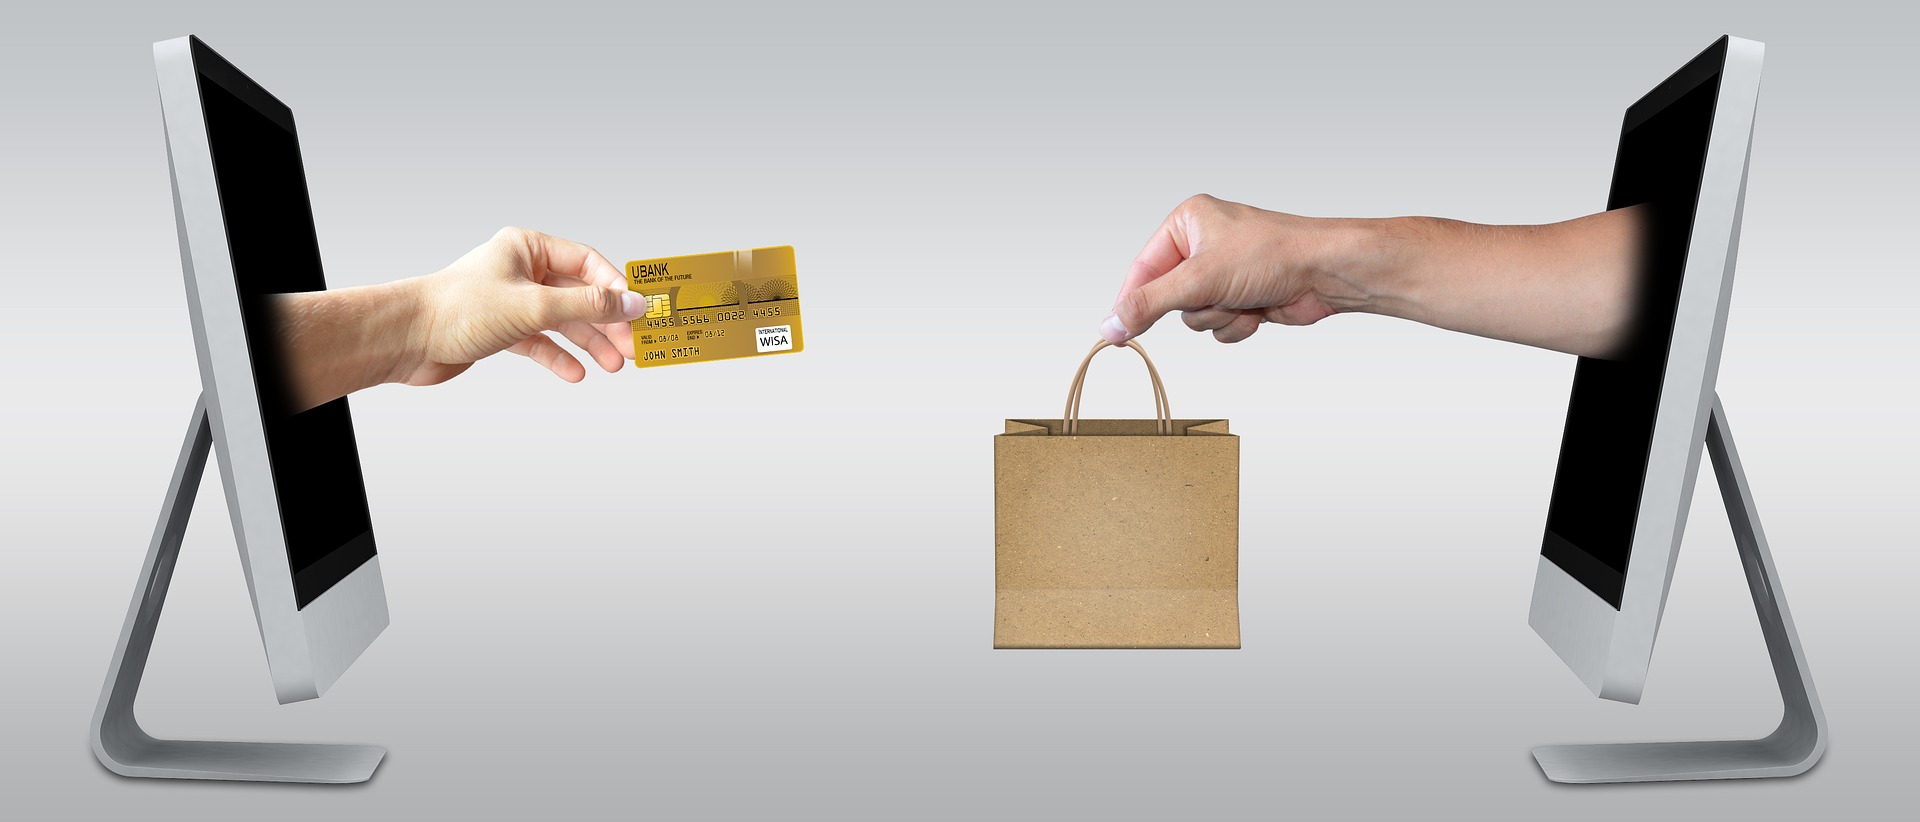 Two monitors with arms reaching out of them, exchanging a gold credit card for purchased items